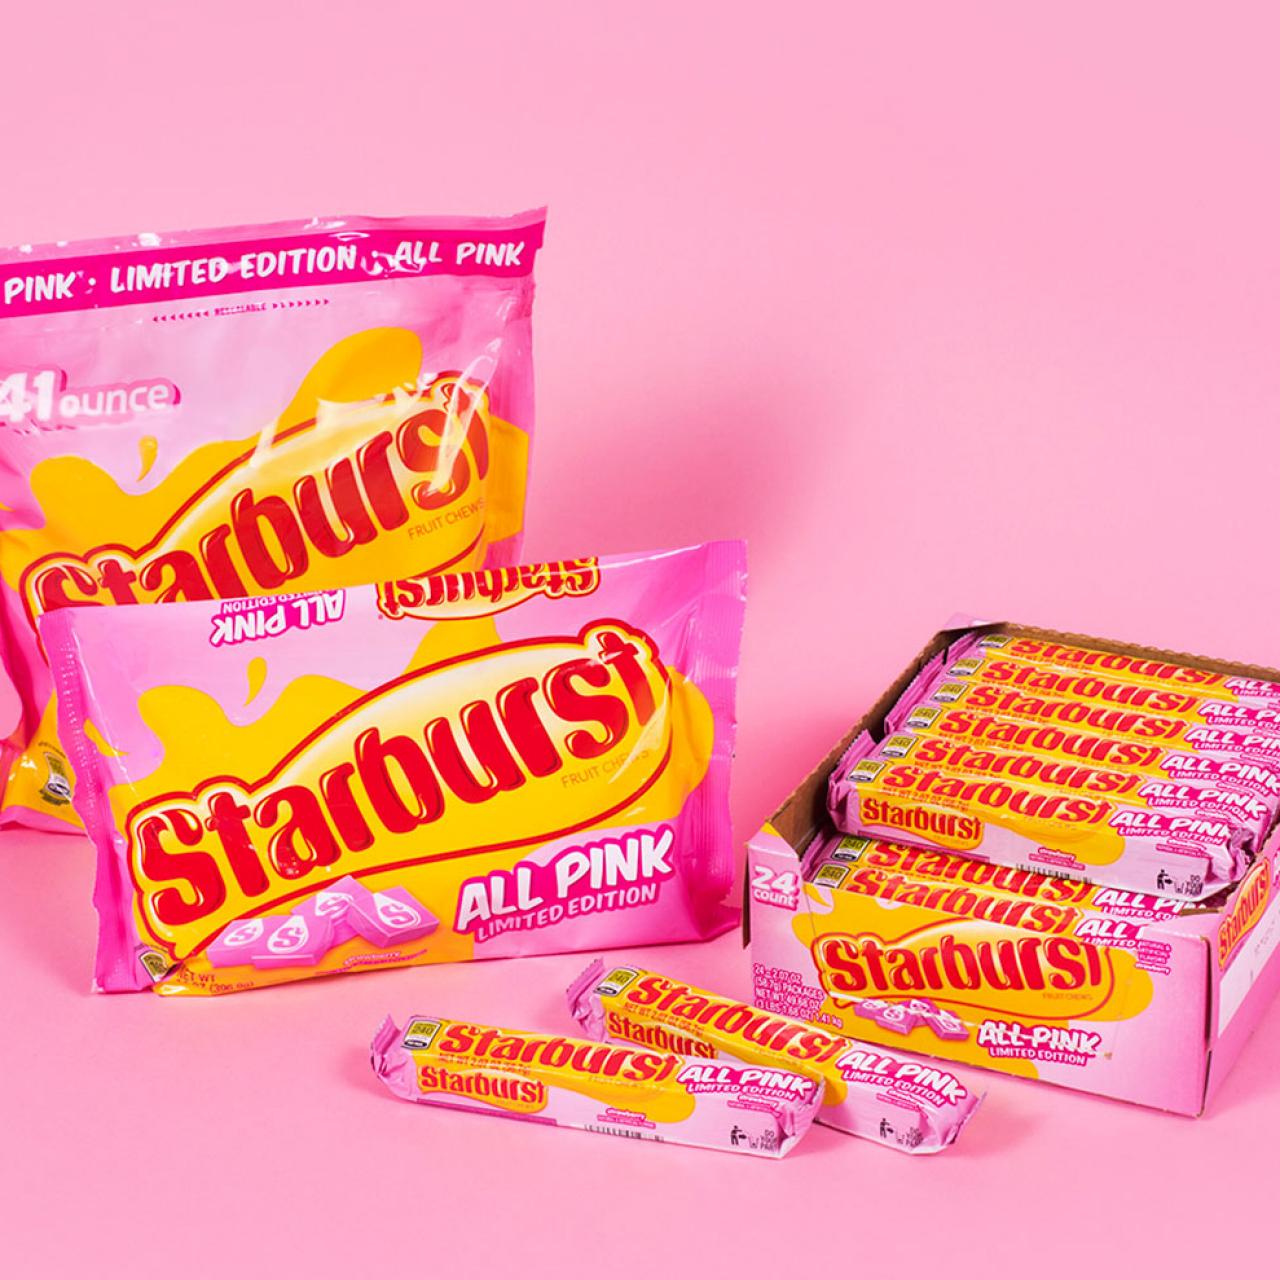 Starburst Launched a Clothing Line Inspired By the Only Candy